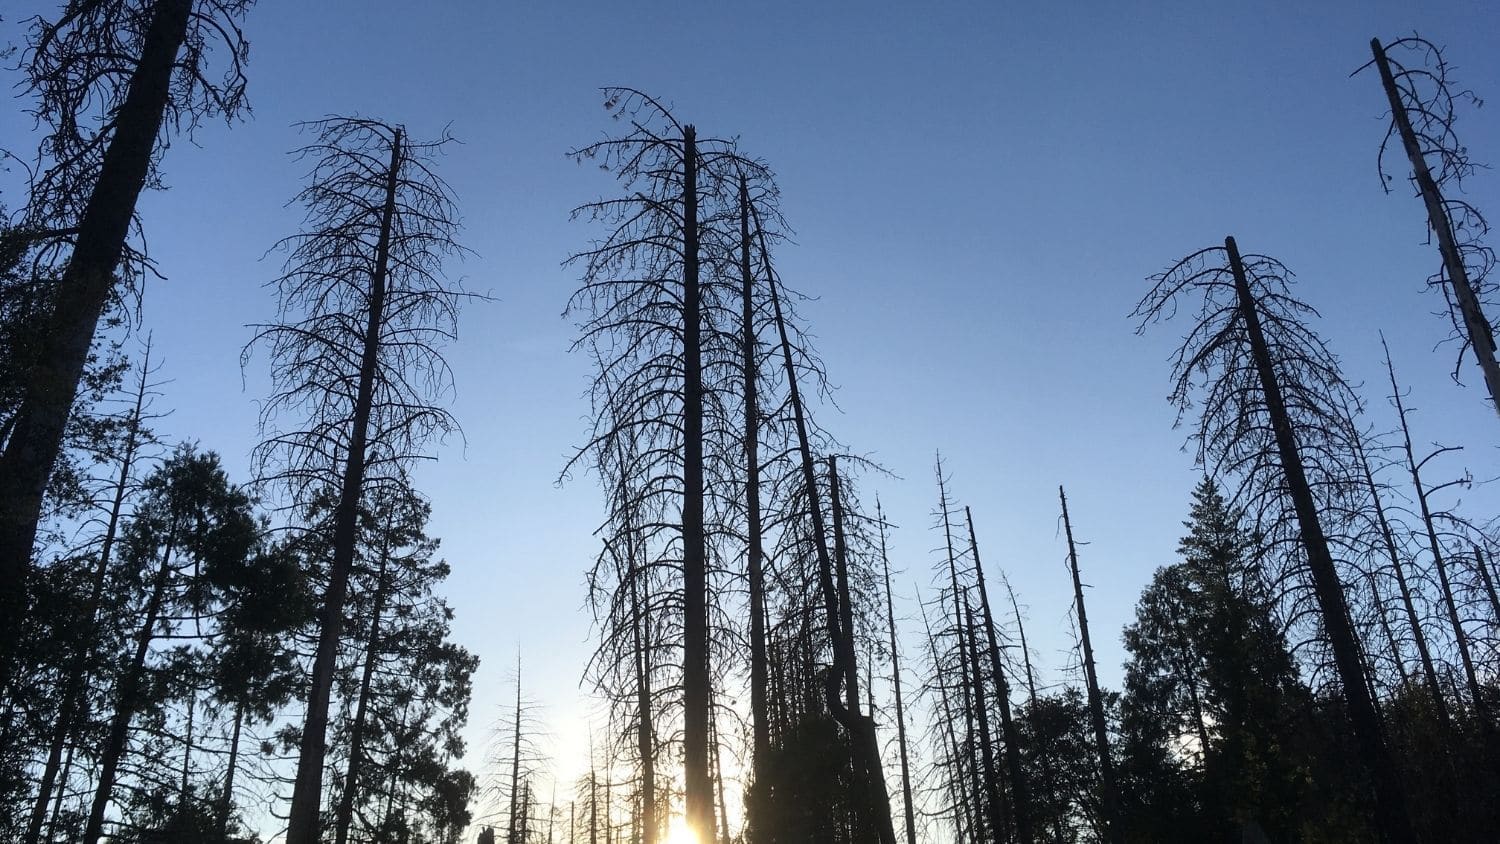 Dead ponderosa pine trees - During An Historic Drought, Higher Temperatures Helped a Beetle Kill More California Pine Trees - College of Natural Resources News - NC State University